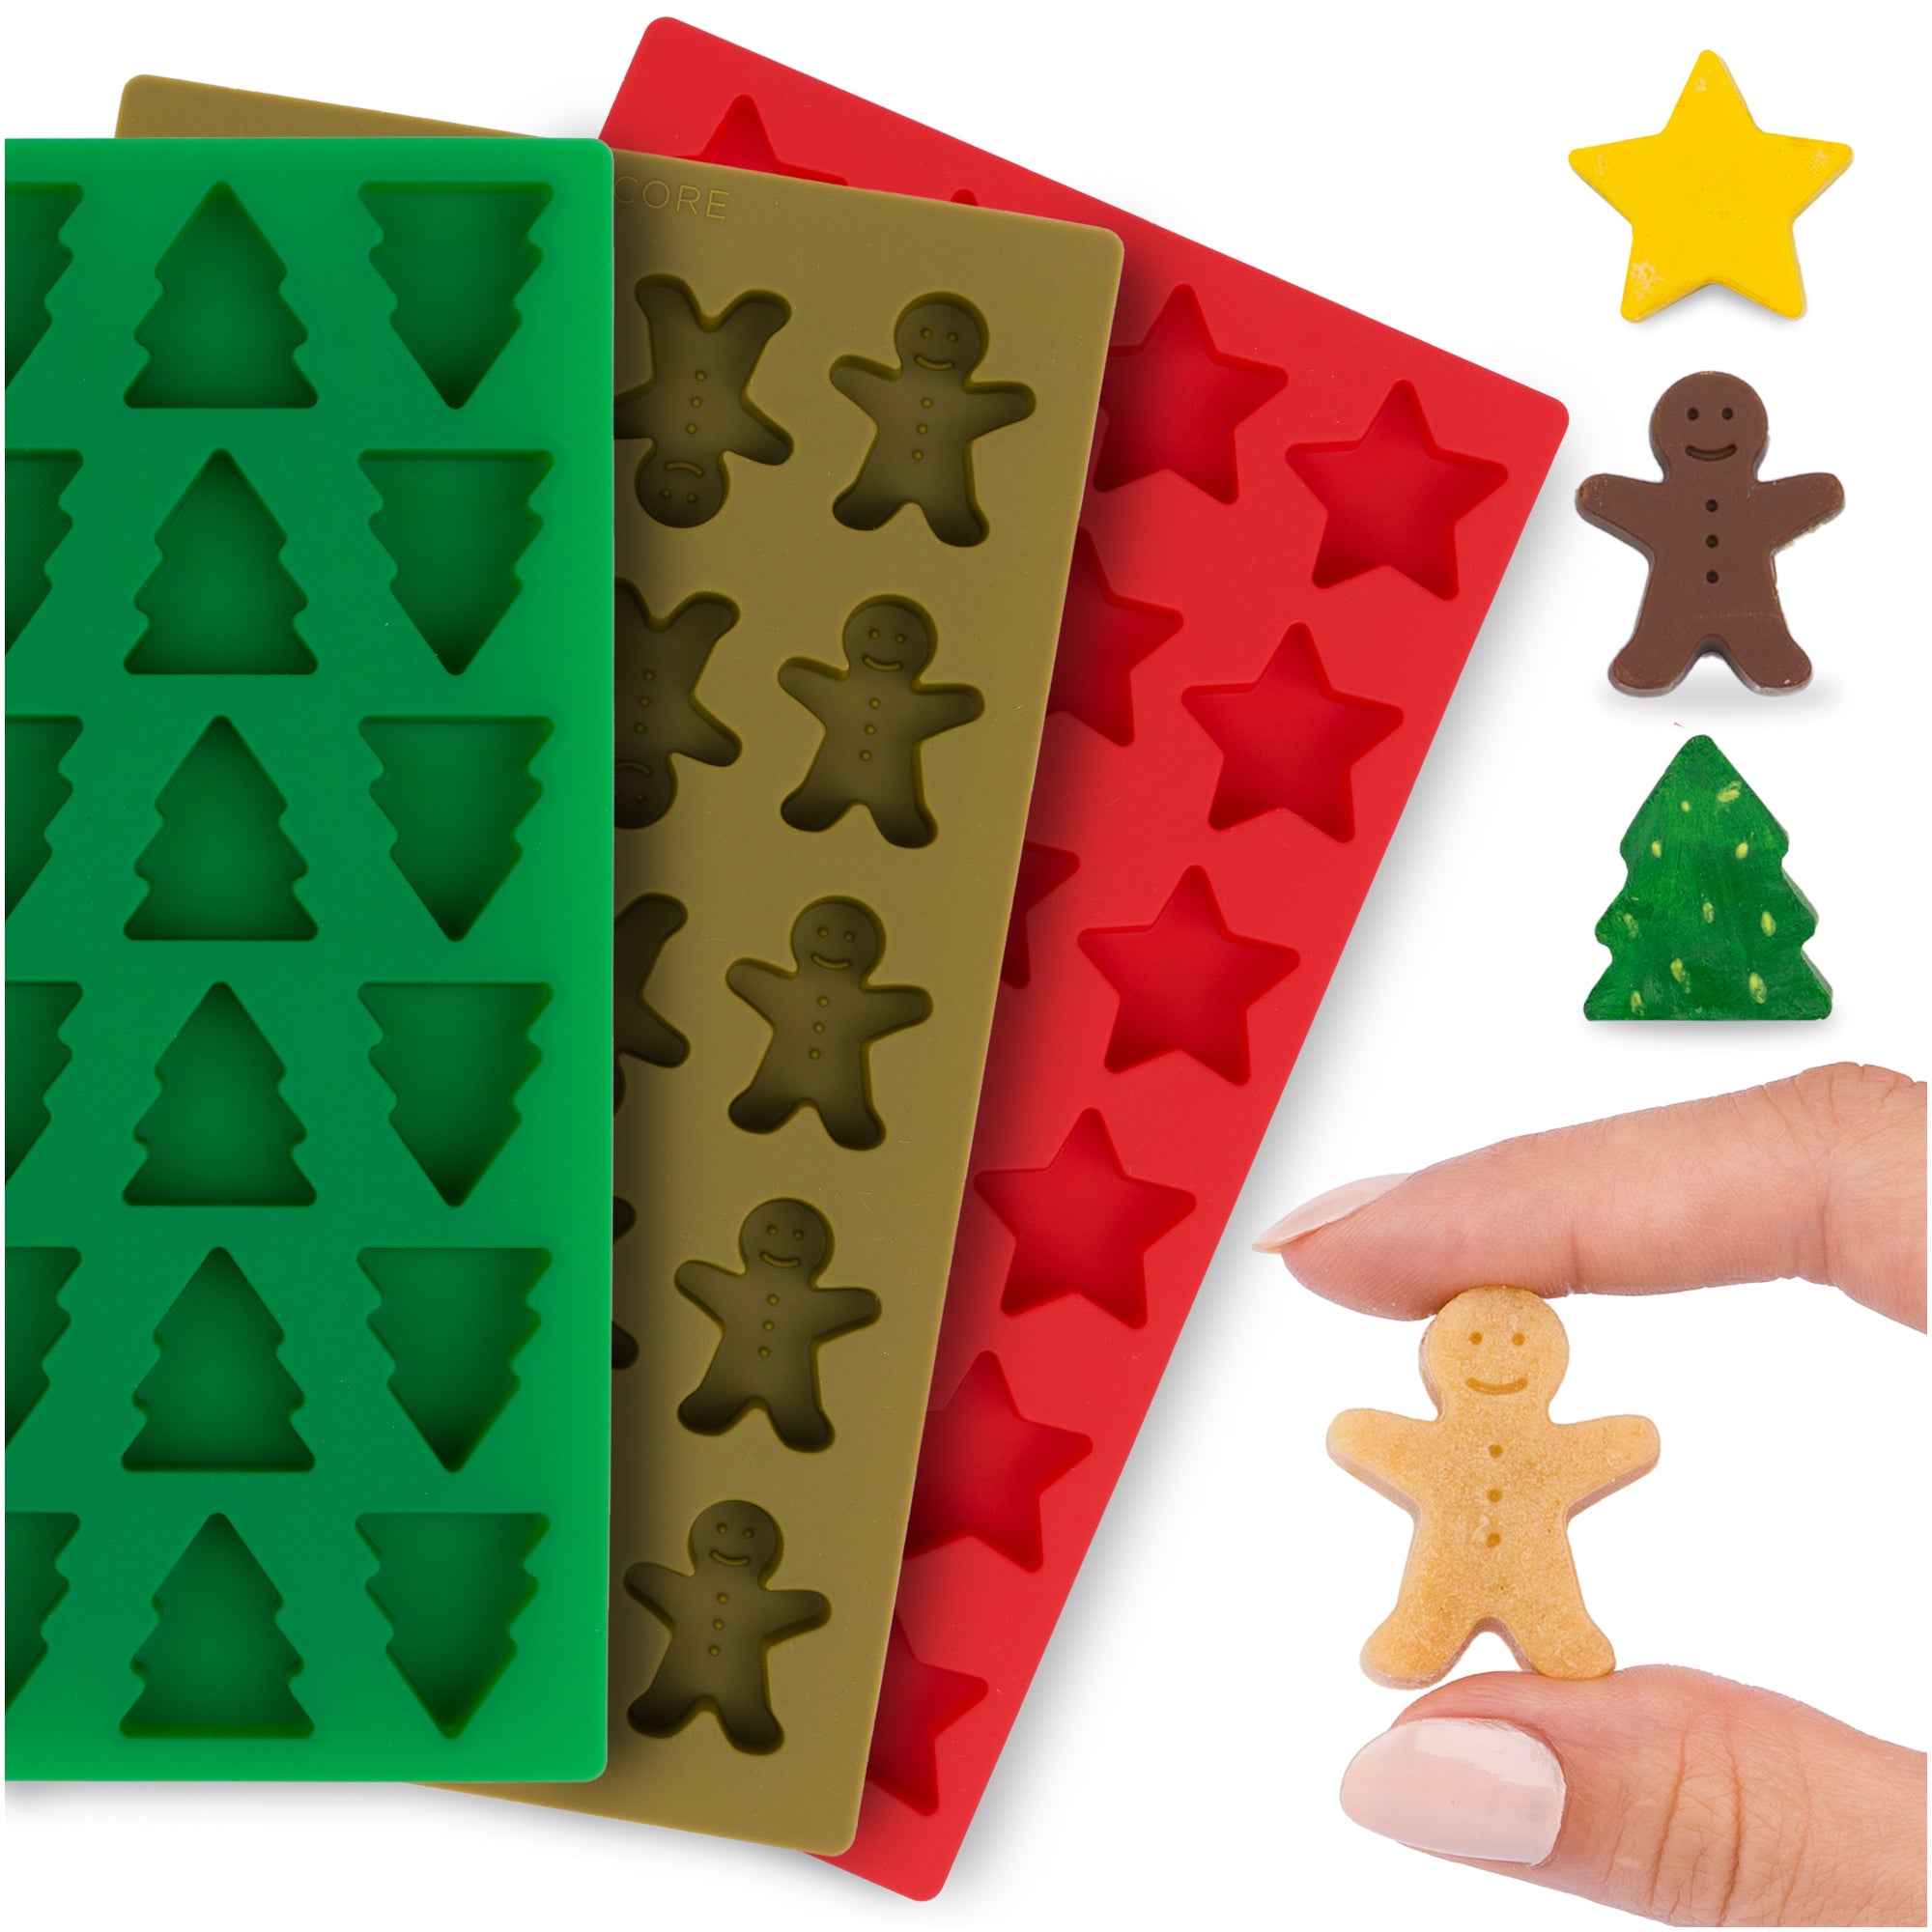 Christmas Pack Silicone Molds for Festive Baking | Combo of Christmas Tree, Star & Gingerbread Man Designs - Perfect for Crafting Chocolates, Candies & Holiday Treats - Set for Joyous Celebrations